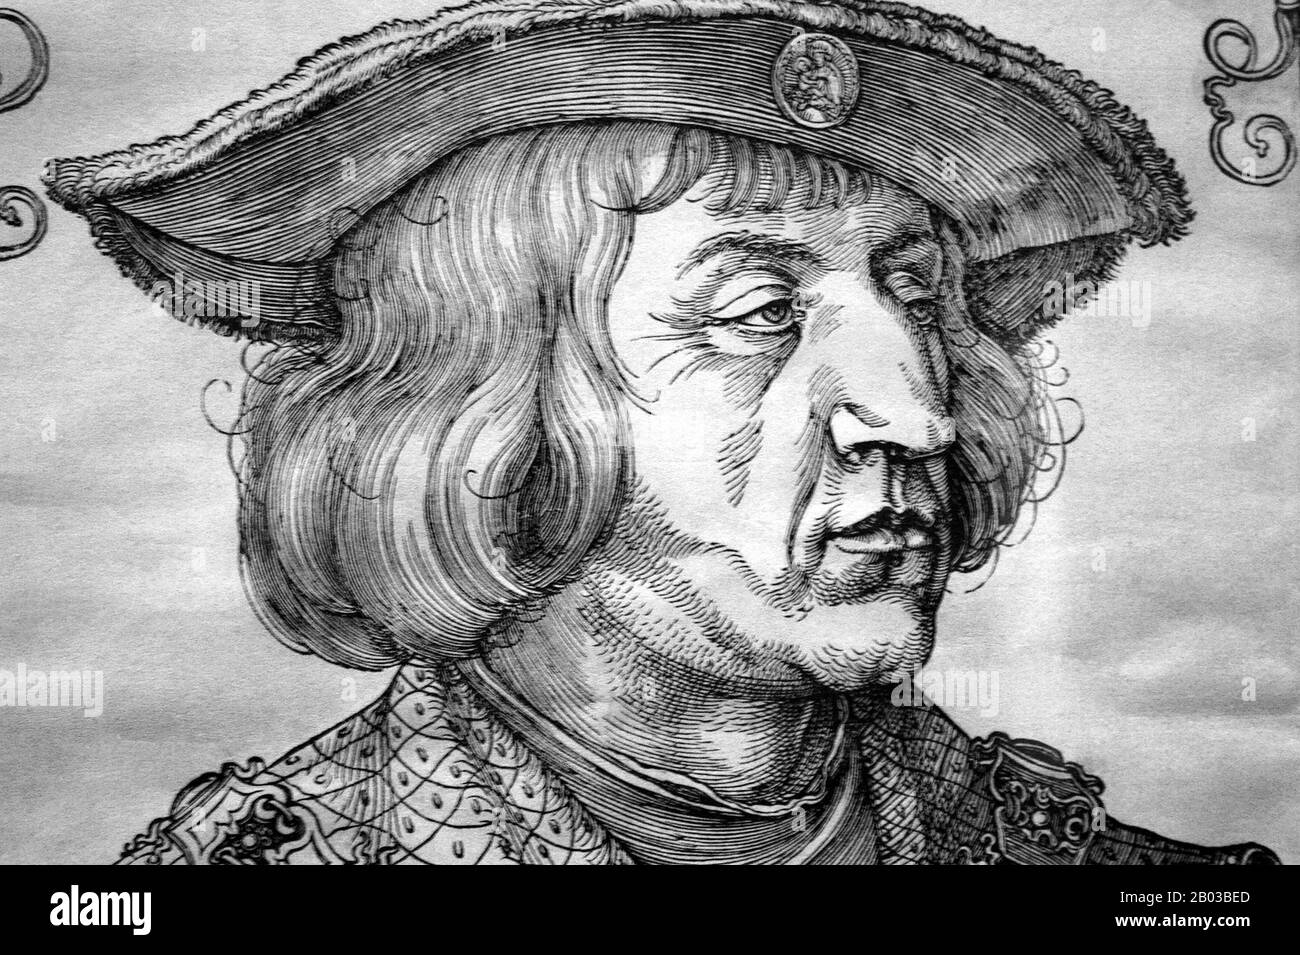 Maximilian I (22 March 1459 – 12 January 1519), the son of Frederick III, Holy Roman Emperor, and Eleanor of Portugal, was King of the Romans (also known as King of the Germans) from 1486 and Holy Roman Emperor from 1508 until his death, though he was never in fact crowned by the Pope, the journey to Rome always being too risky. Stock Photo